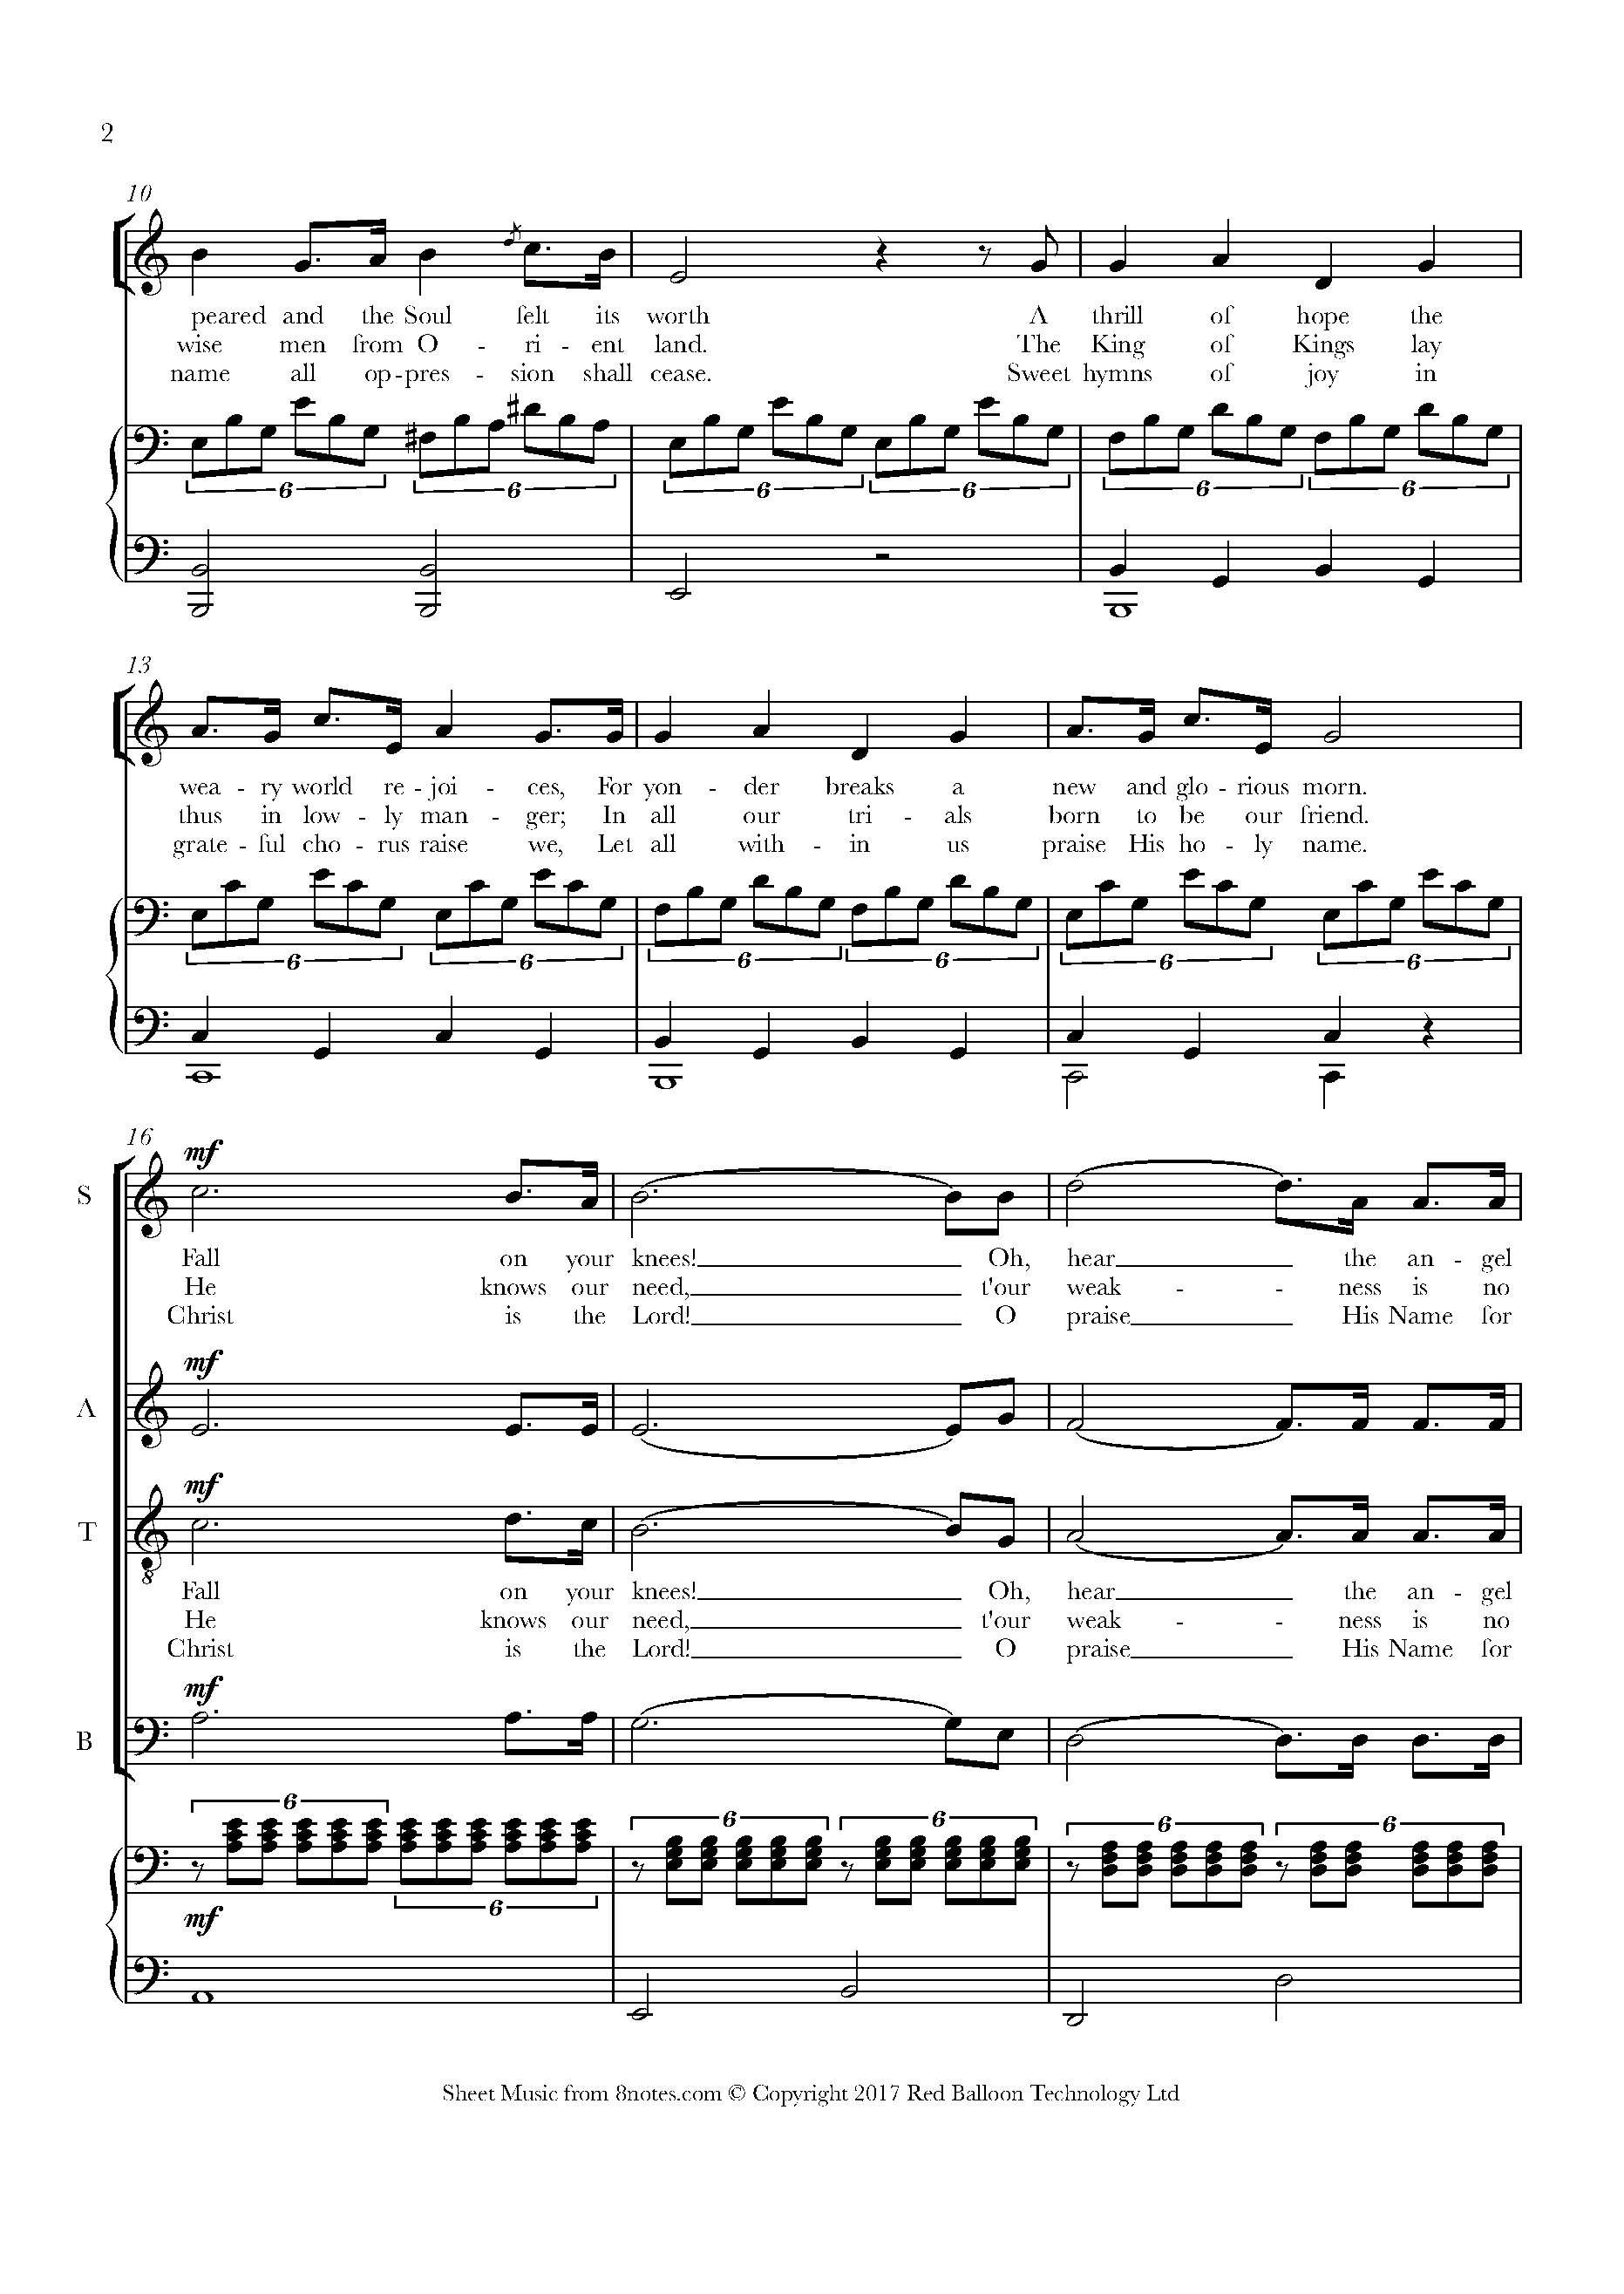 SCORE - O Holy Night for SATB, Oboe (or Flute), and Harp (or Piano) — R.J.B.